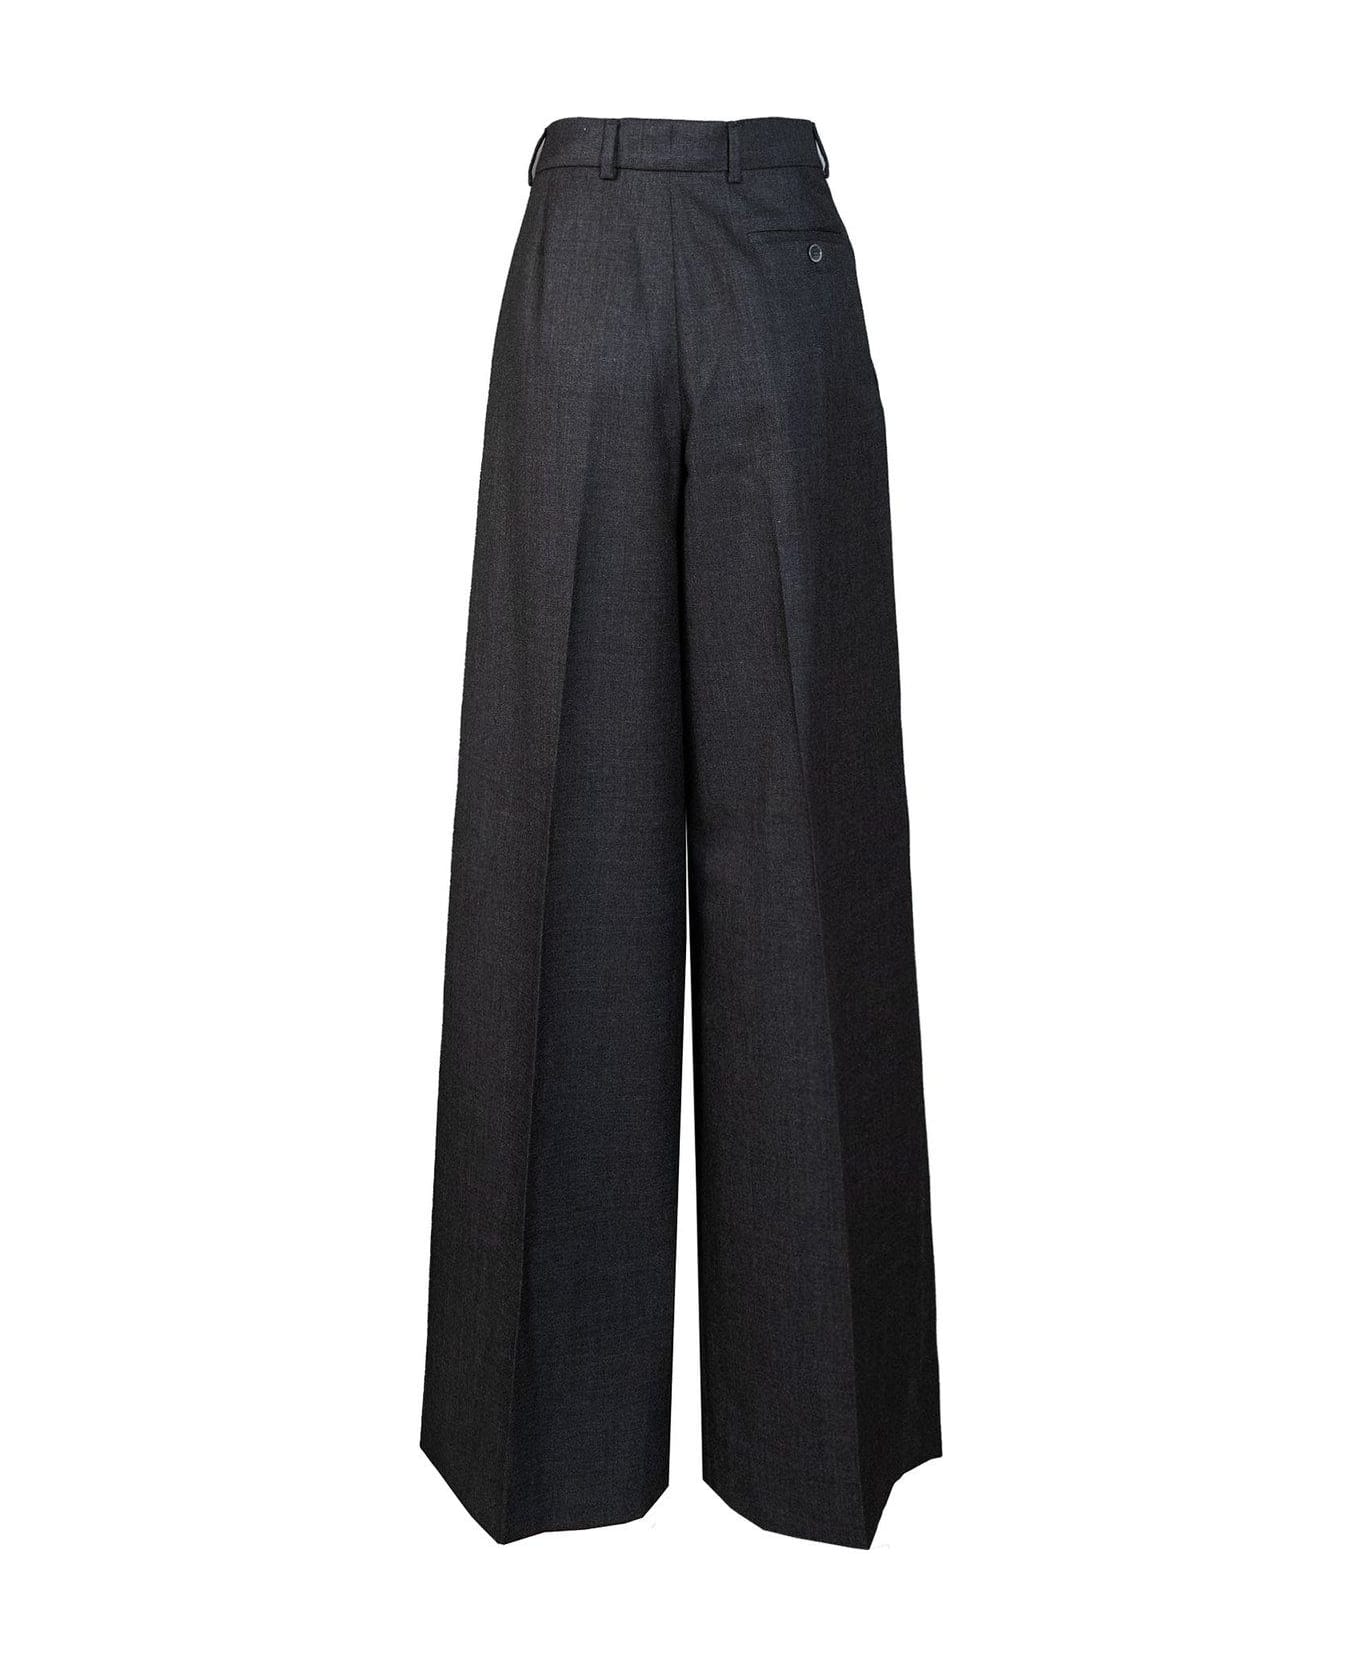 Acne Studios Tailored Wrap Trousers - GREY ボトムス